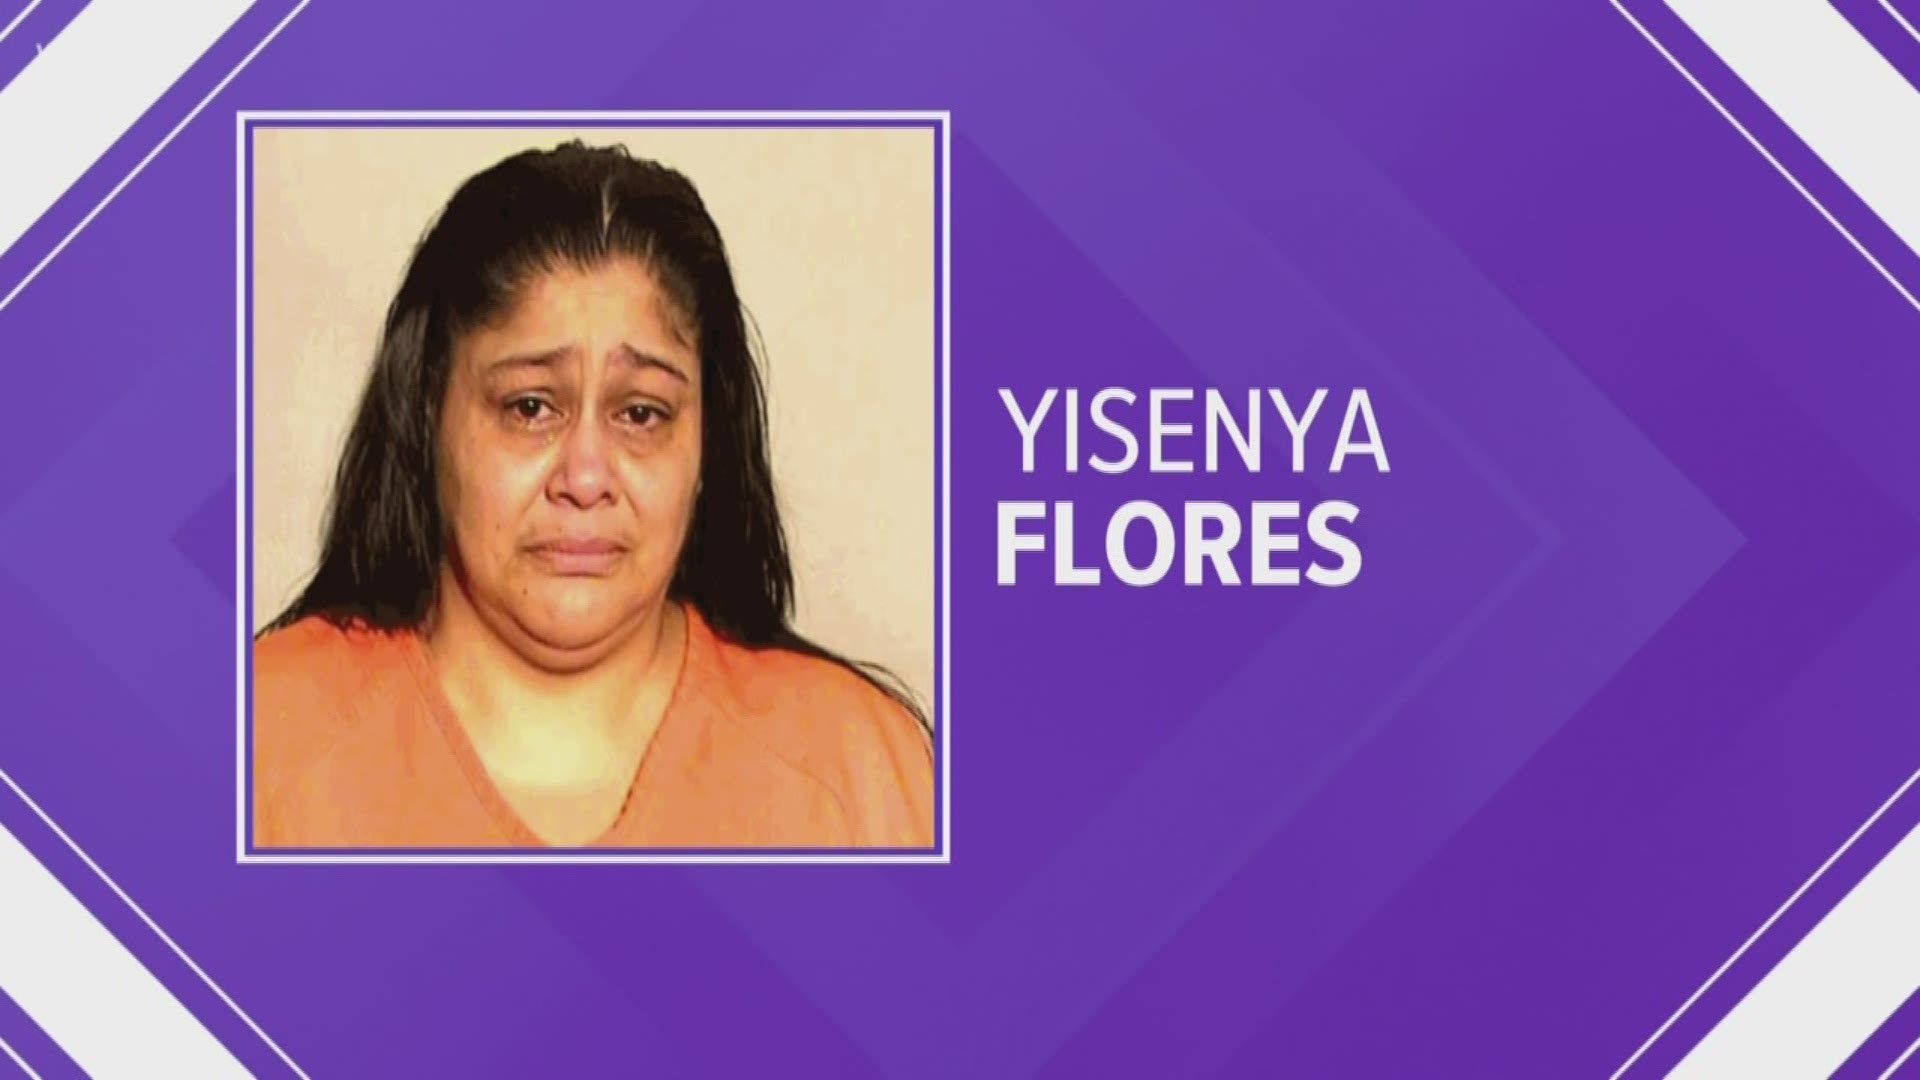 Yisenya Flores faces aggravated murder and tampering with evidence charges. She is accused of hitting the 5-year-old and delaying calling 911.